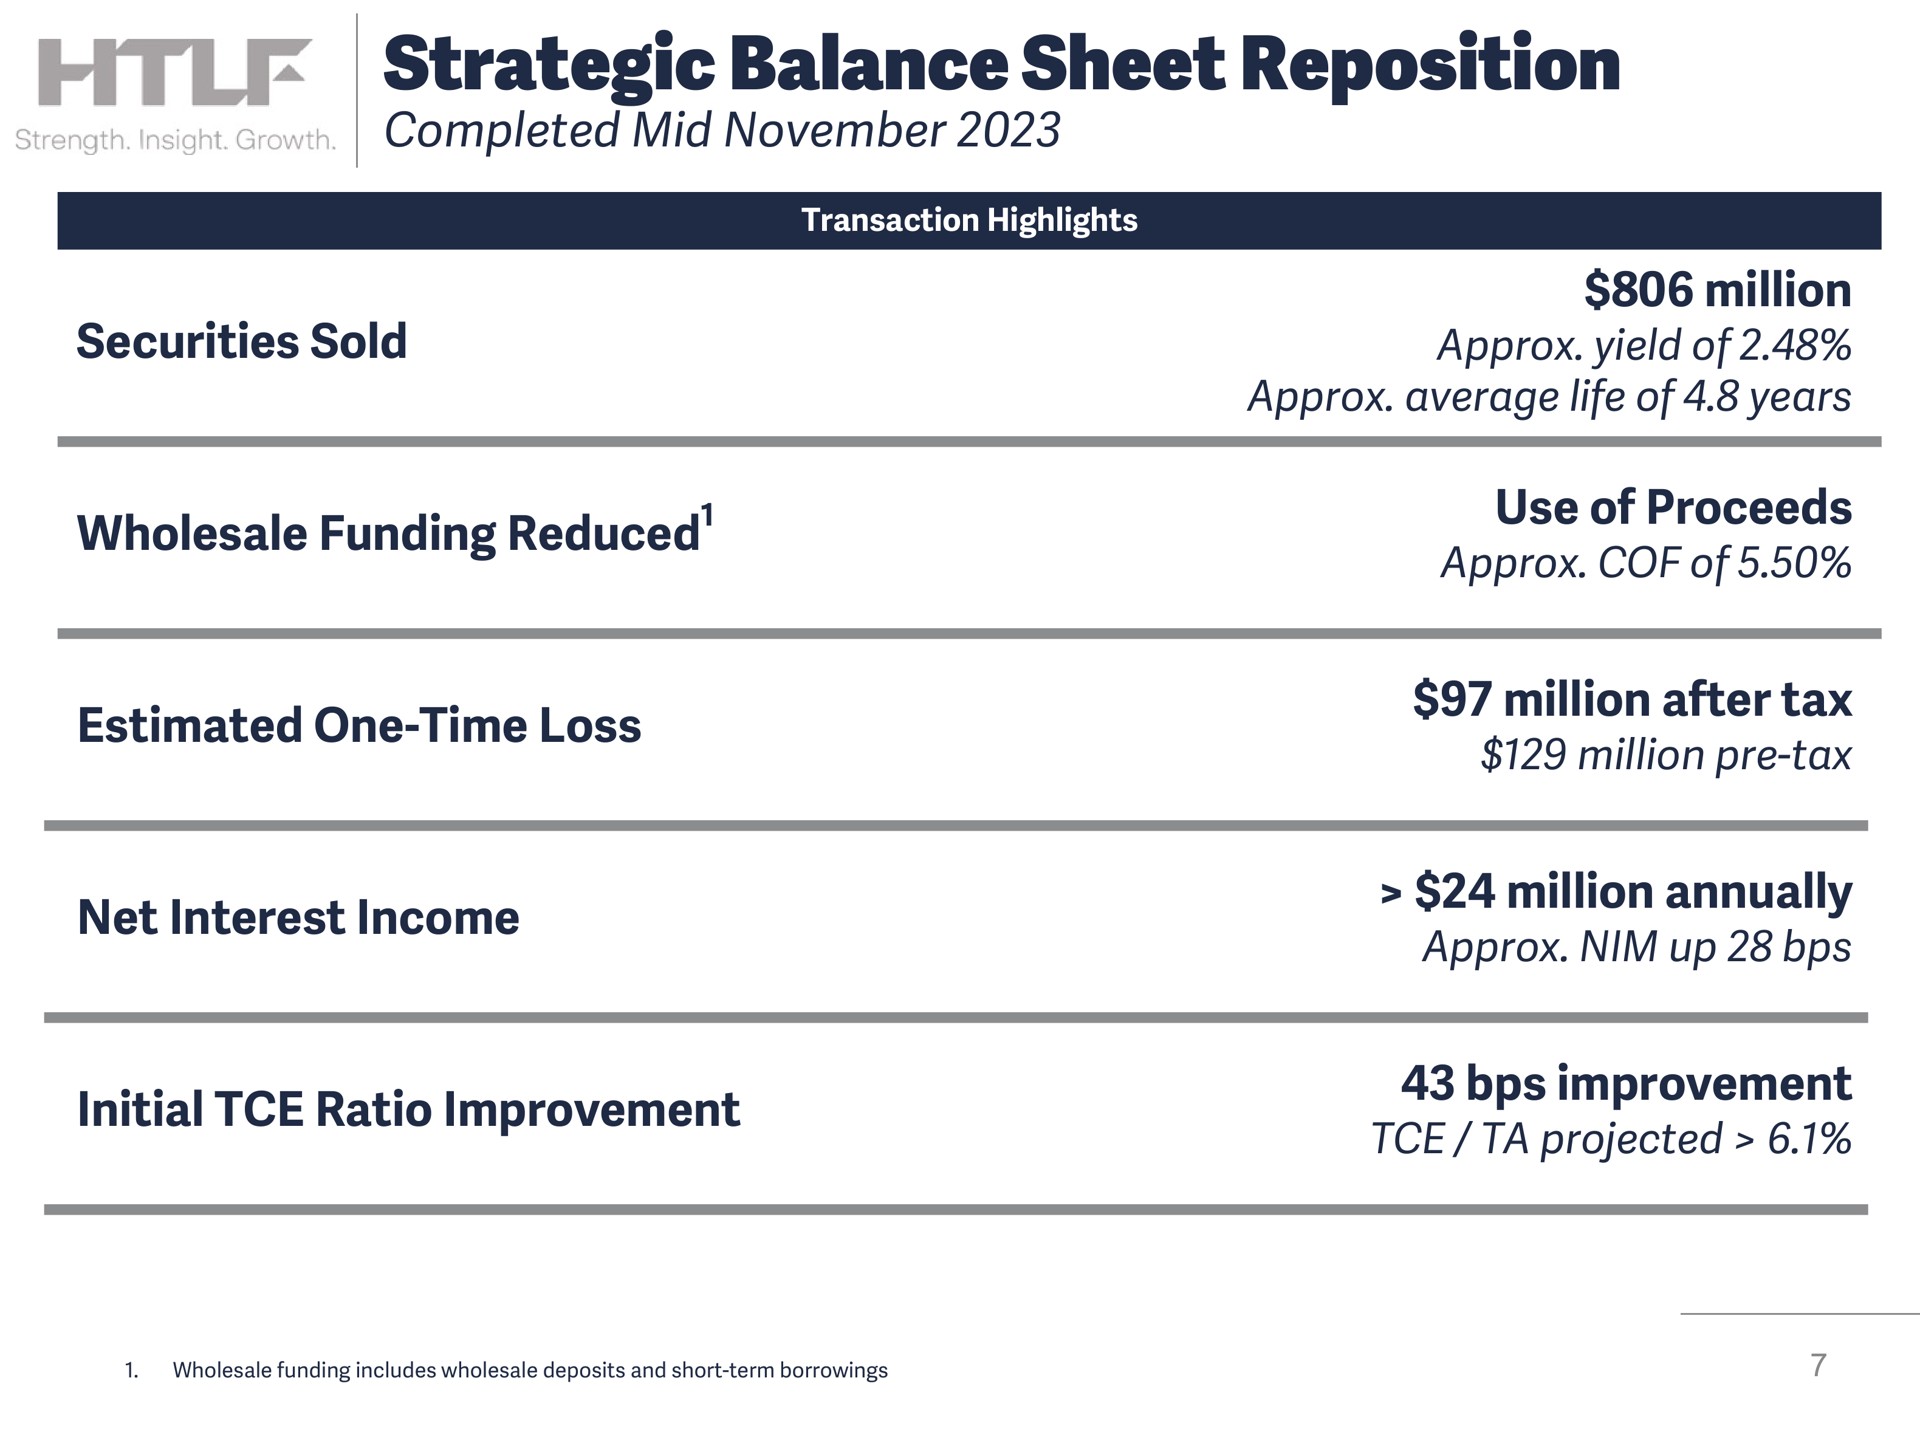 strategic balance sheet reposition completed mid securities sold wholesale funding reduced estimated one time loss net interest income initial ratio improvement million yield of average life of years use of proceeds of million after tax million tax million annually nim up improvement projected reduced | Heartland Financial USA